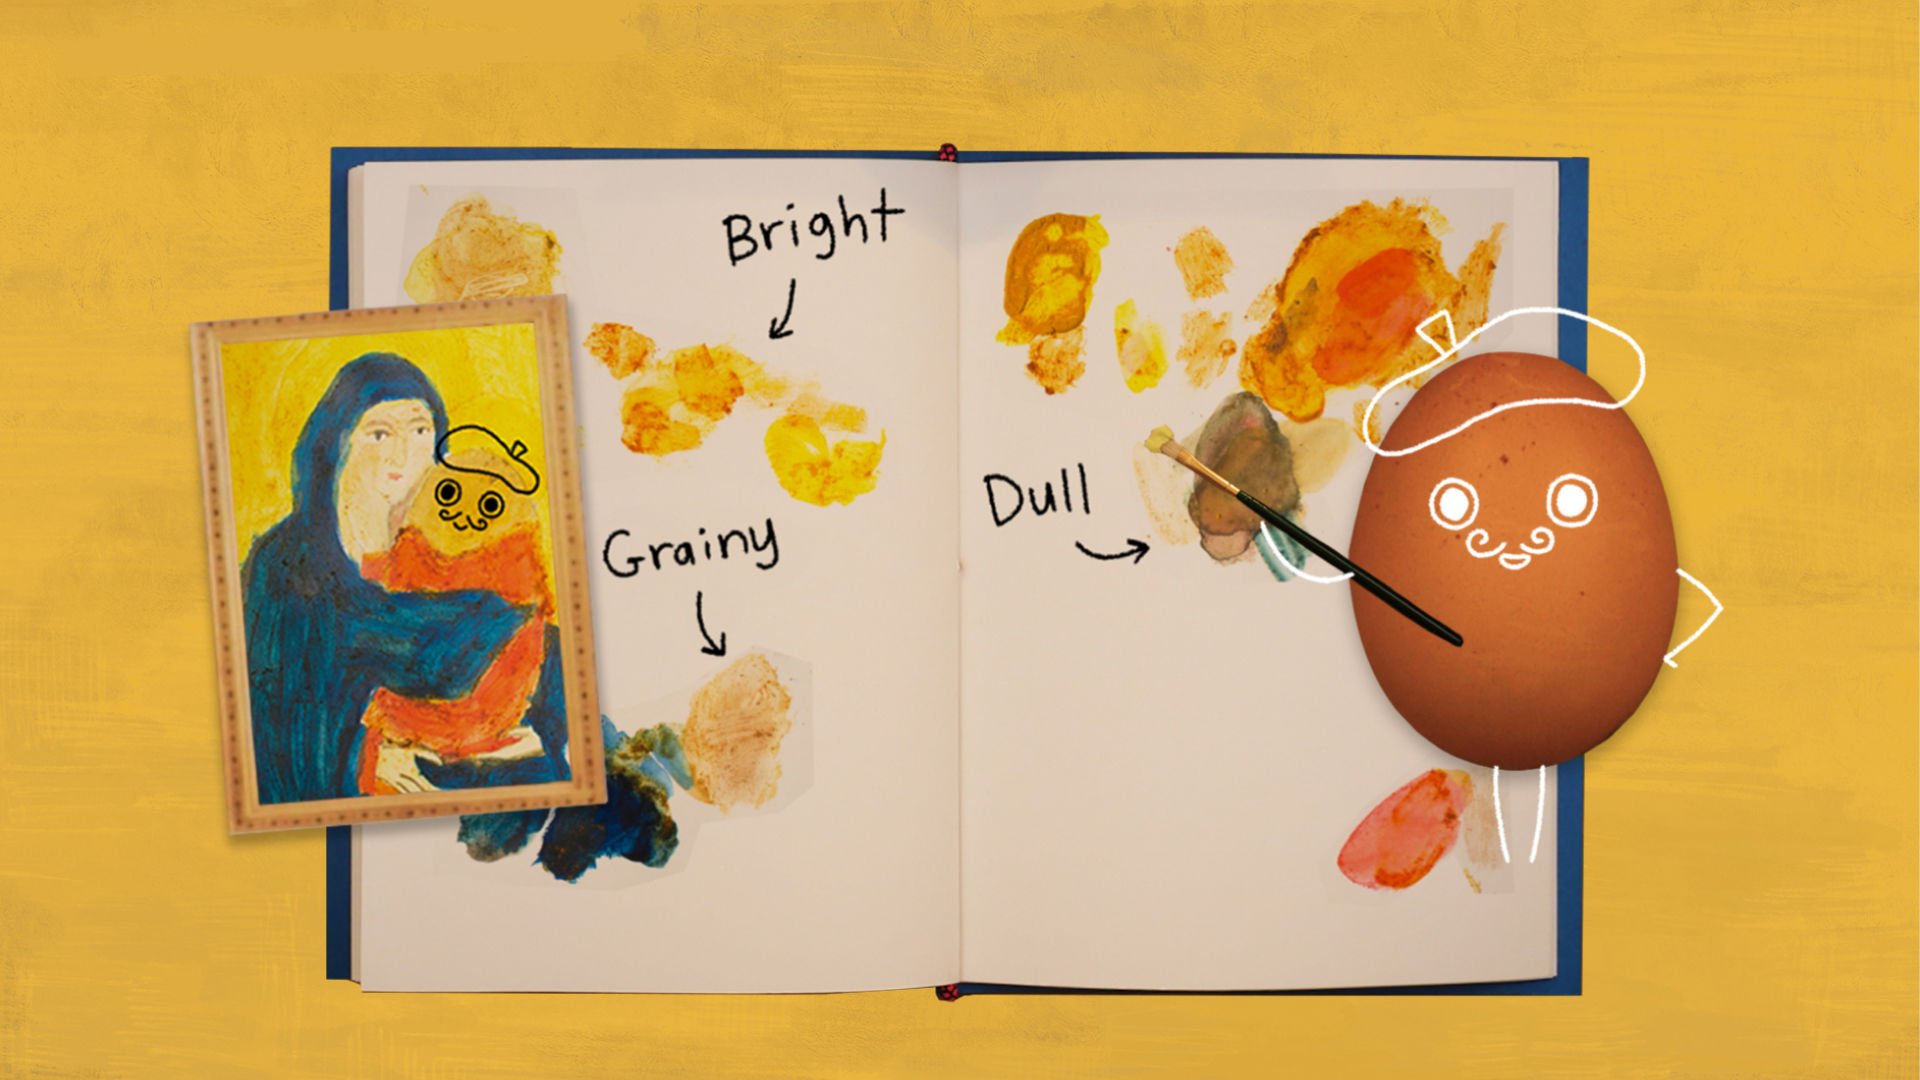 A painting of a Madonna and egg and an illustrated egg artist holding a paint brush flank either side of an open sketch book with colorful test paint swatches labeled bright, grainy, and dull.